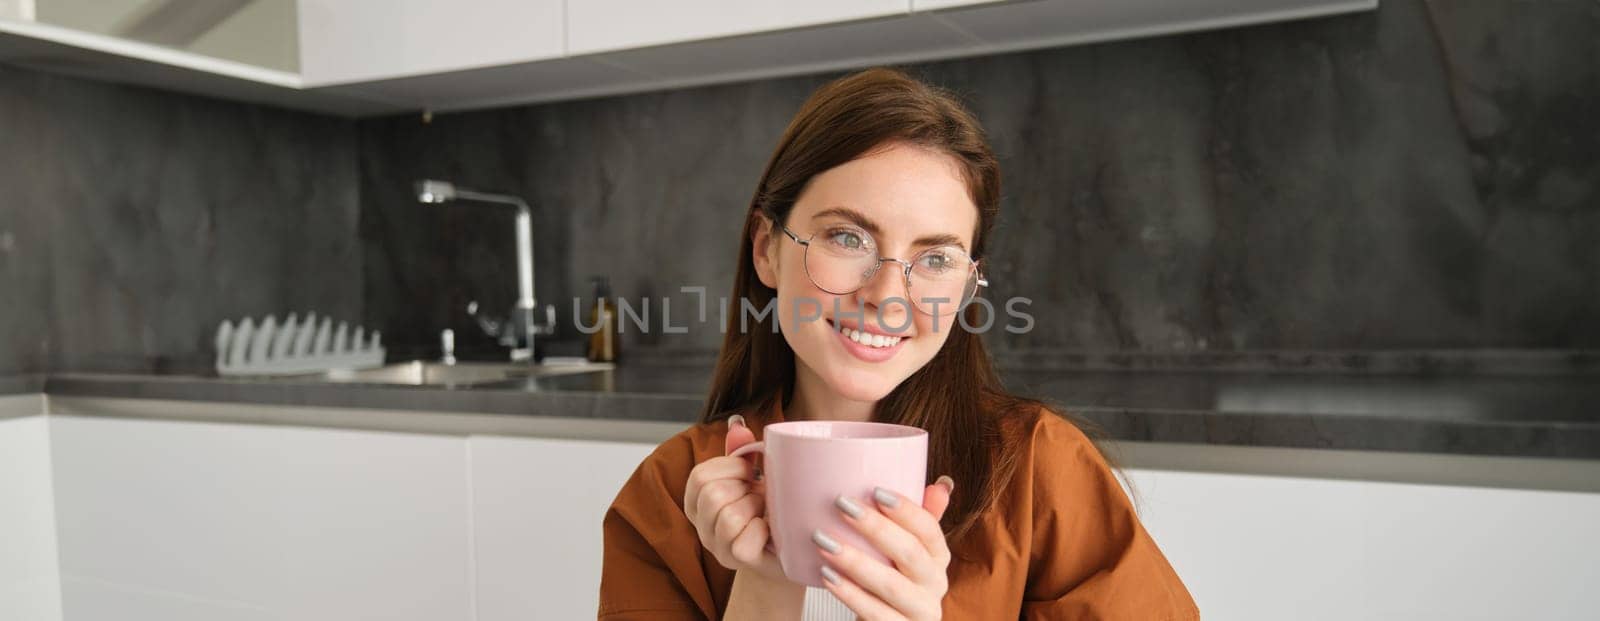 Woman drinking hot coffee at home. Thoughtful young woman drinking a cup of tea while thinking. Pretty girl with sweater relaxing at home while drinking purifying herbal tea.